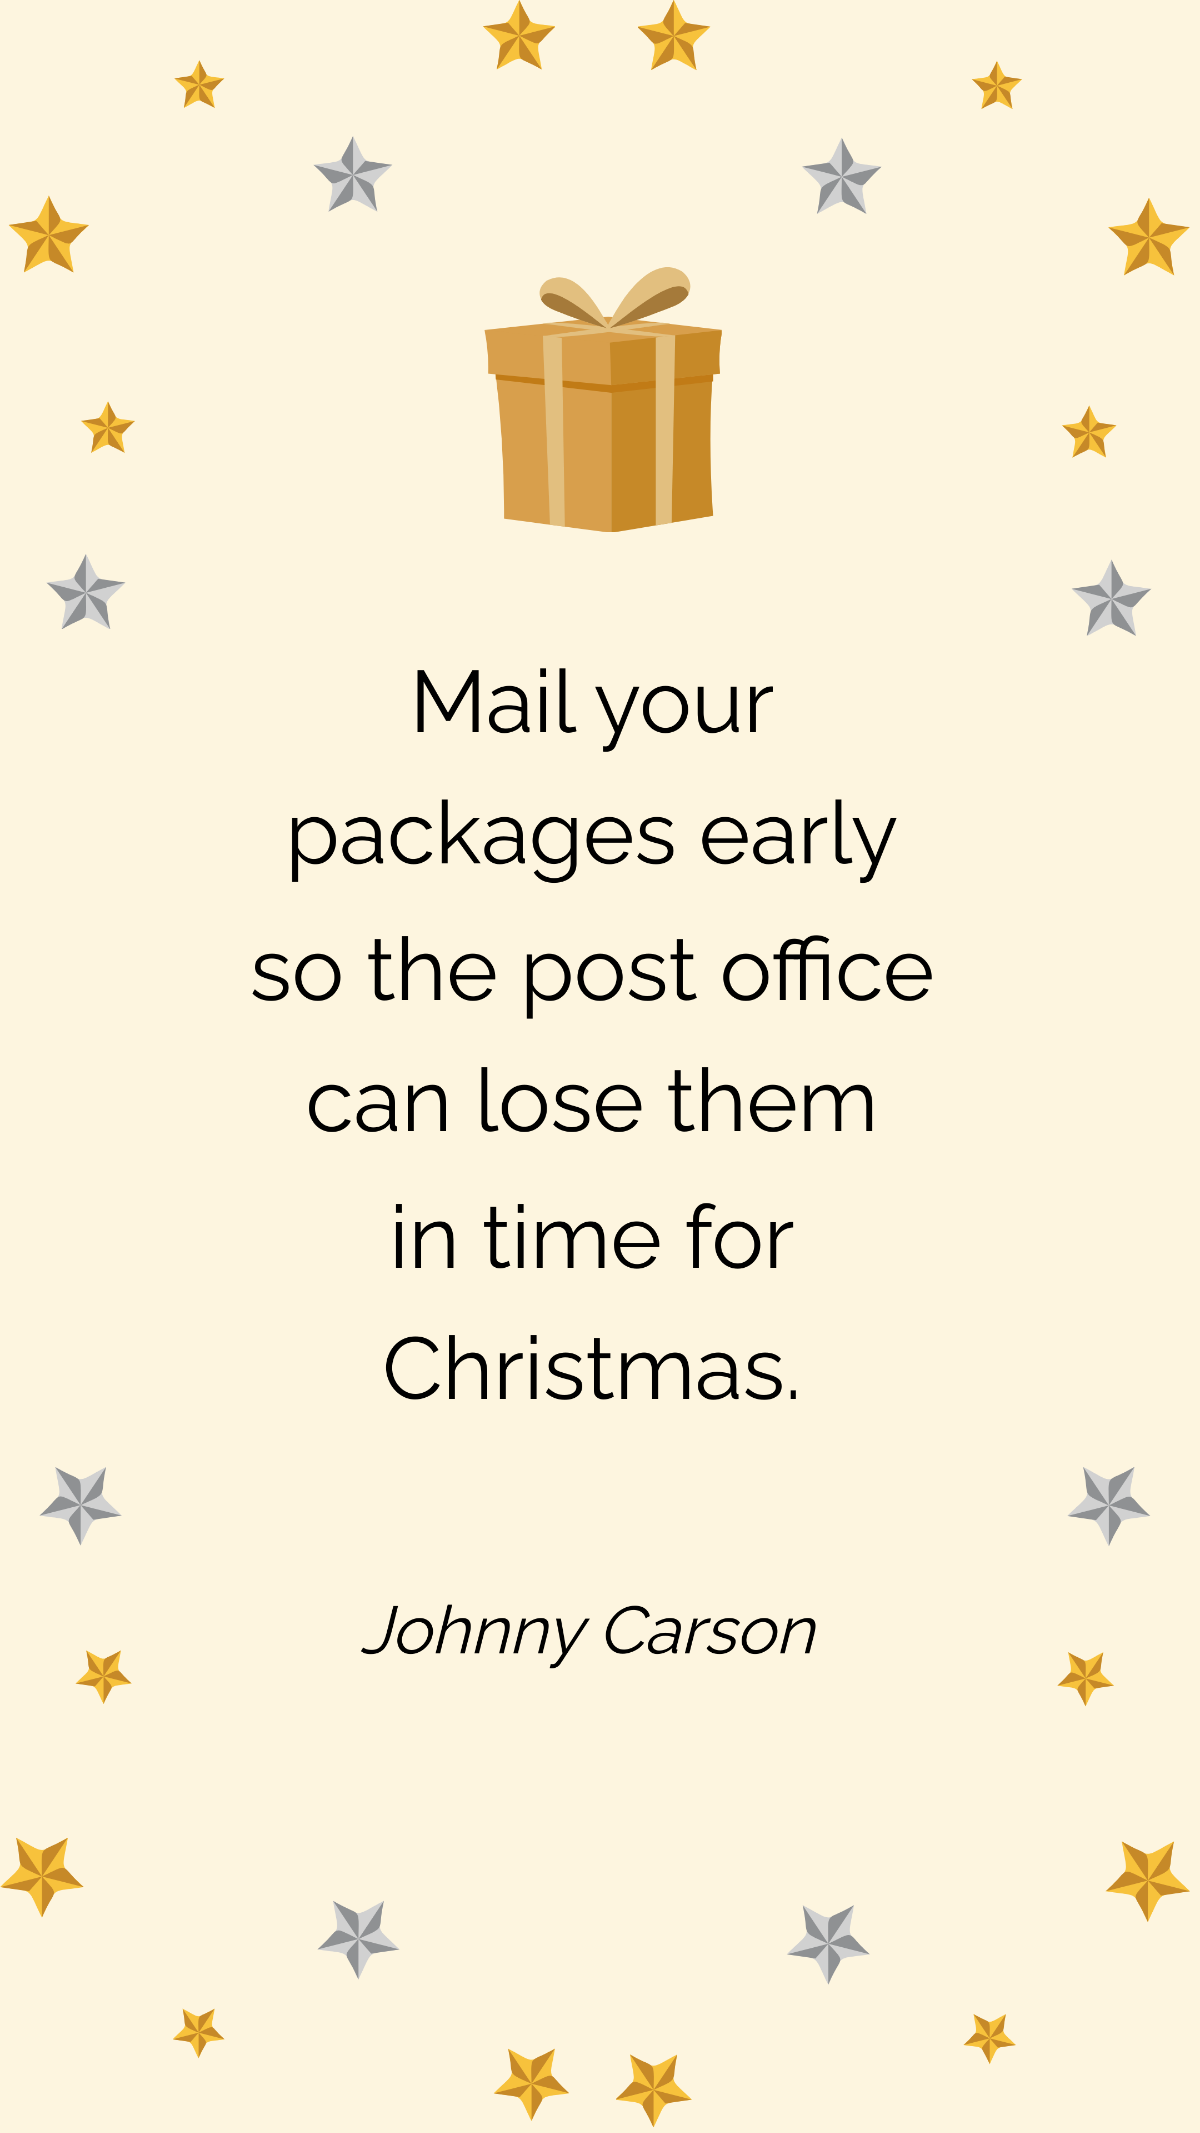 Johnny Carson - Mail your packages early so the post office can lose them in time for Christmas. Template